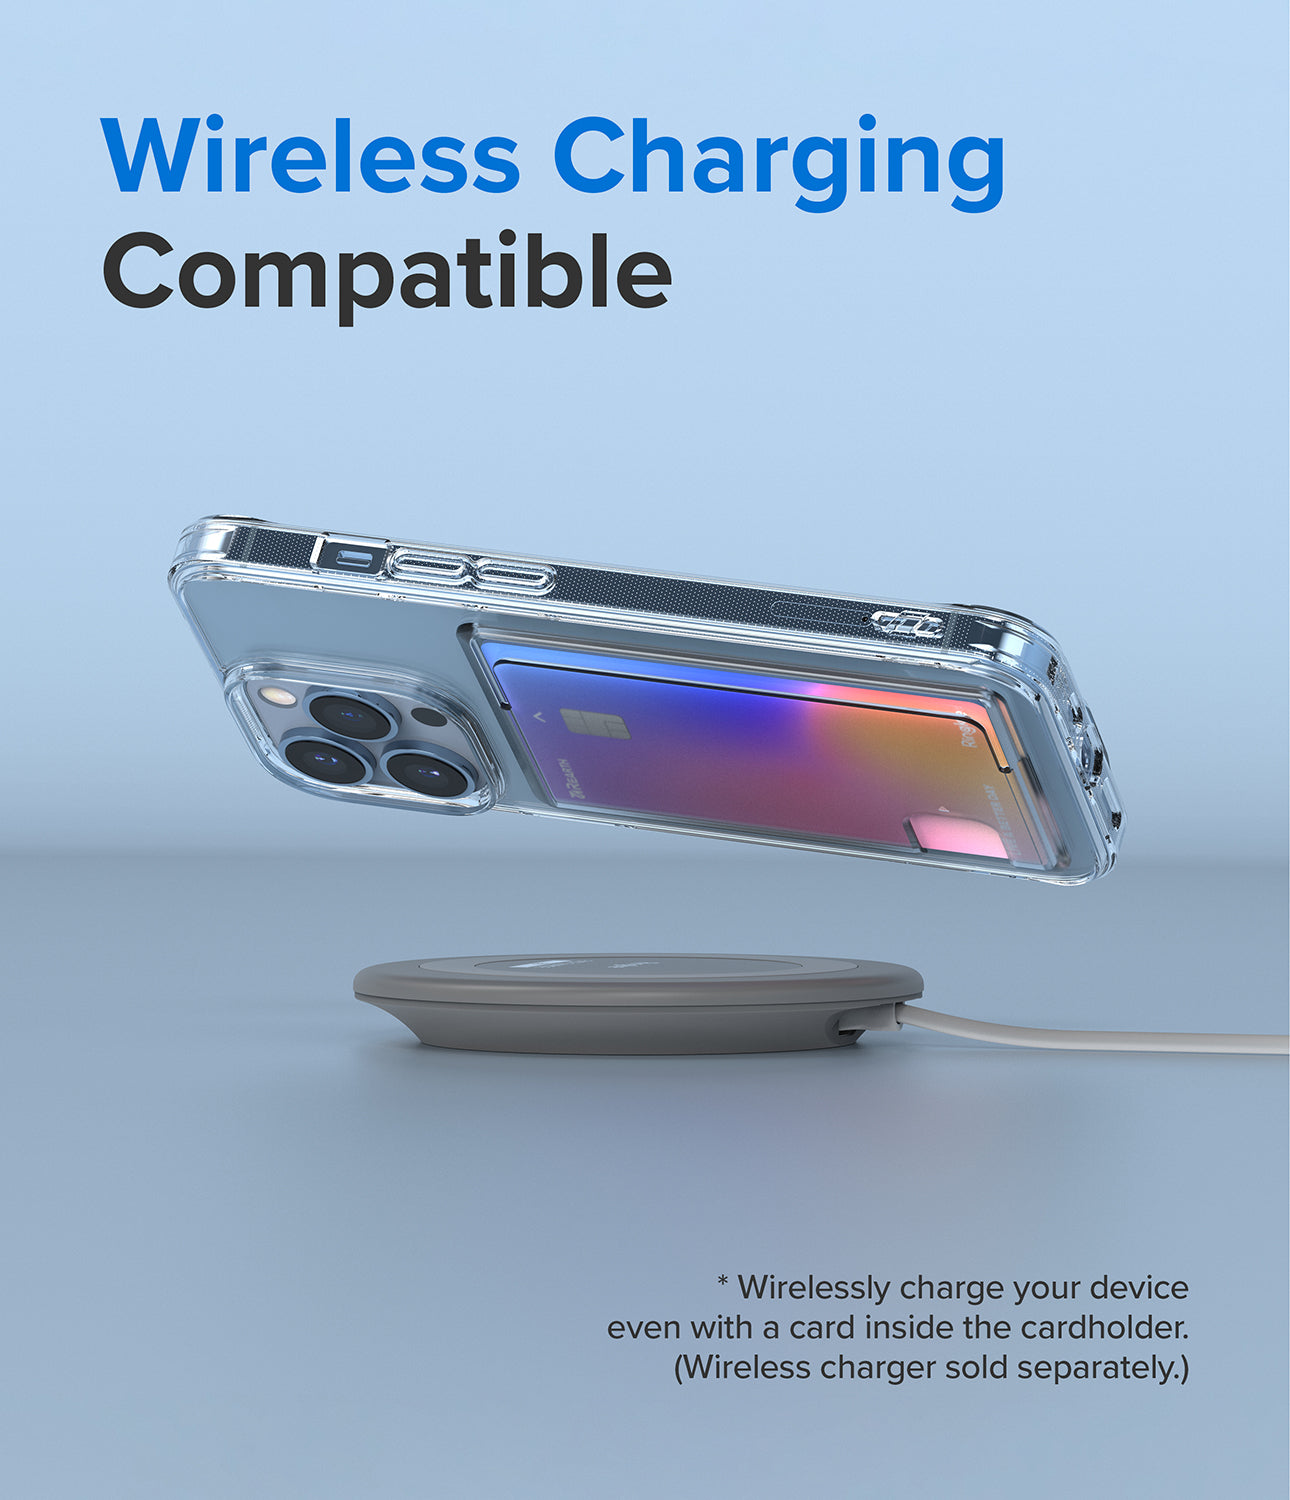 iPhone 13 Pro Case | Fusion Card - Wireless Charging Compatible. Wirelessly charge your device even with a card inside the cardholder.